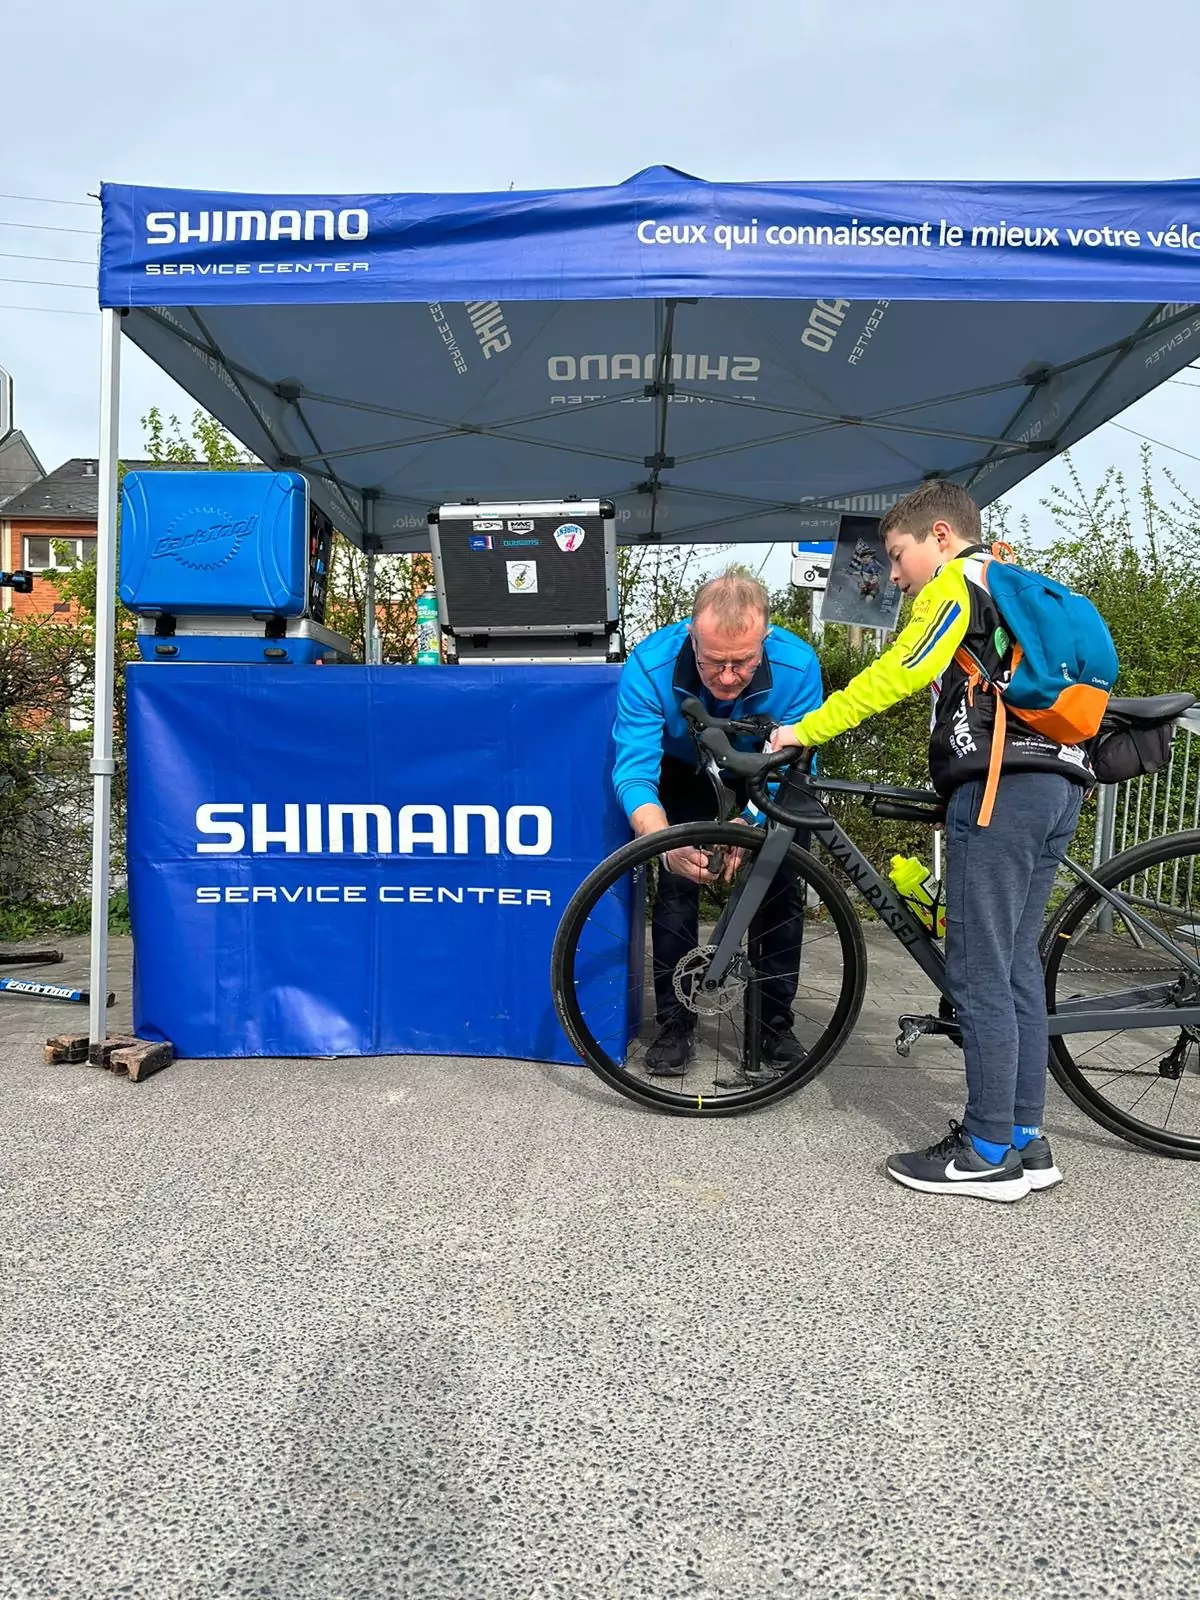 A Shimano employee inflating young boy's road bike tires